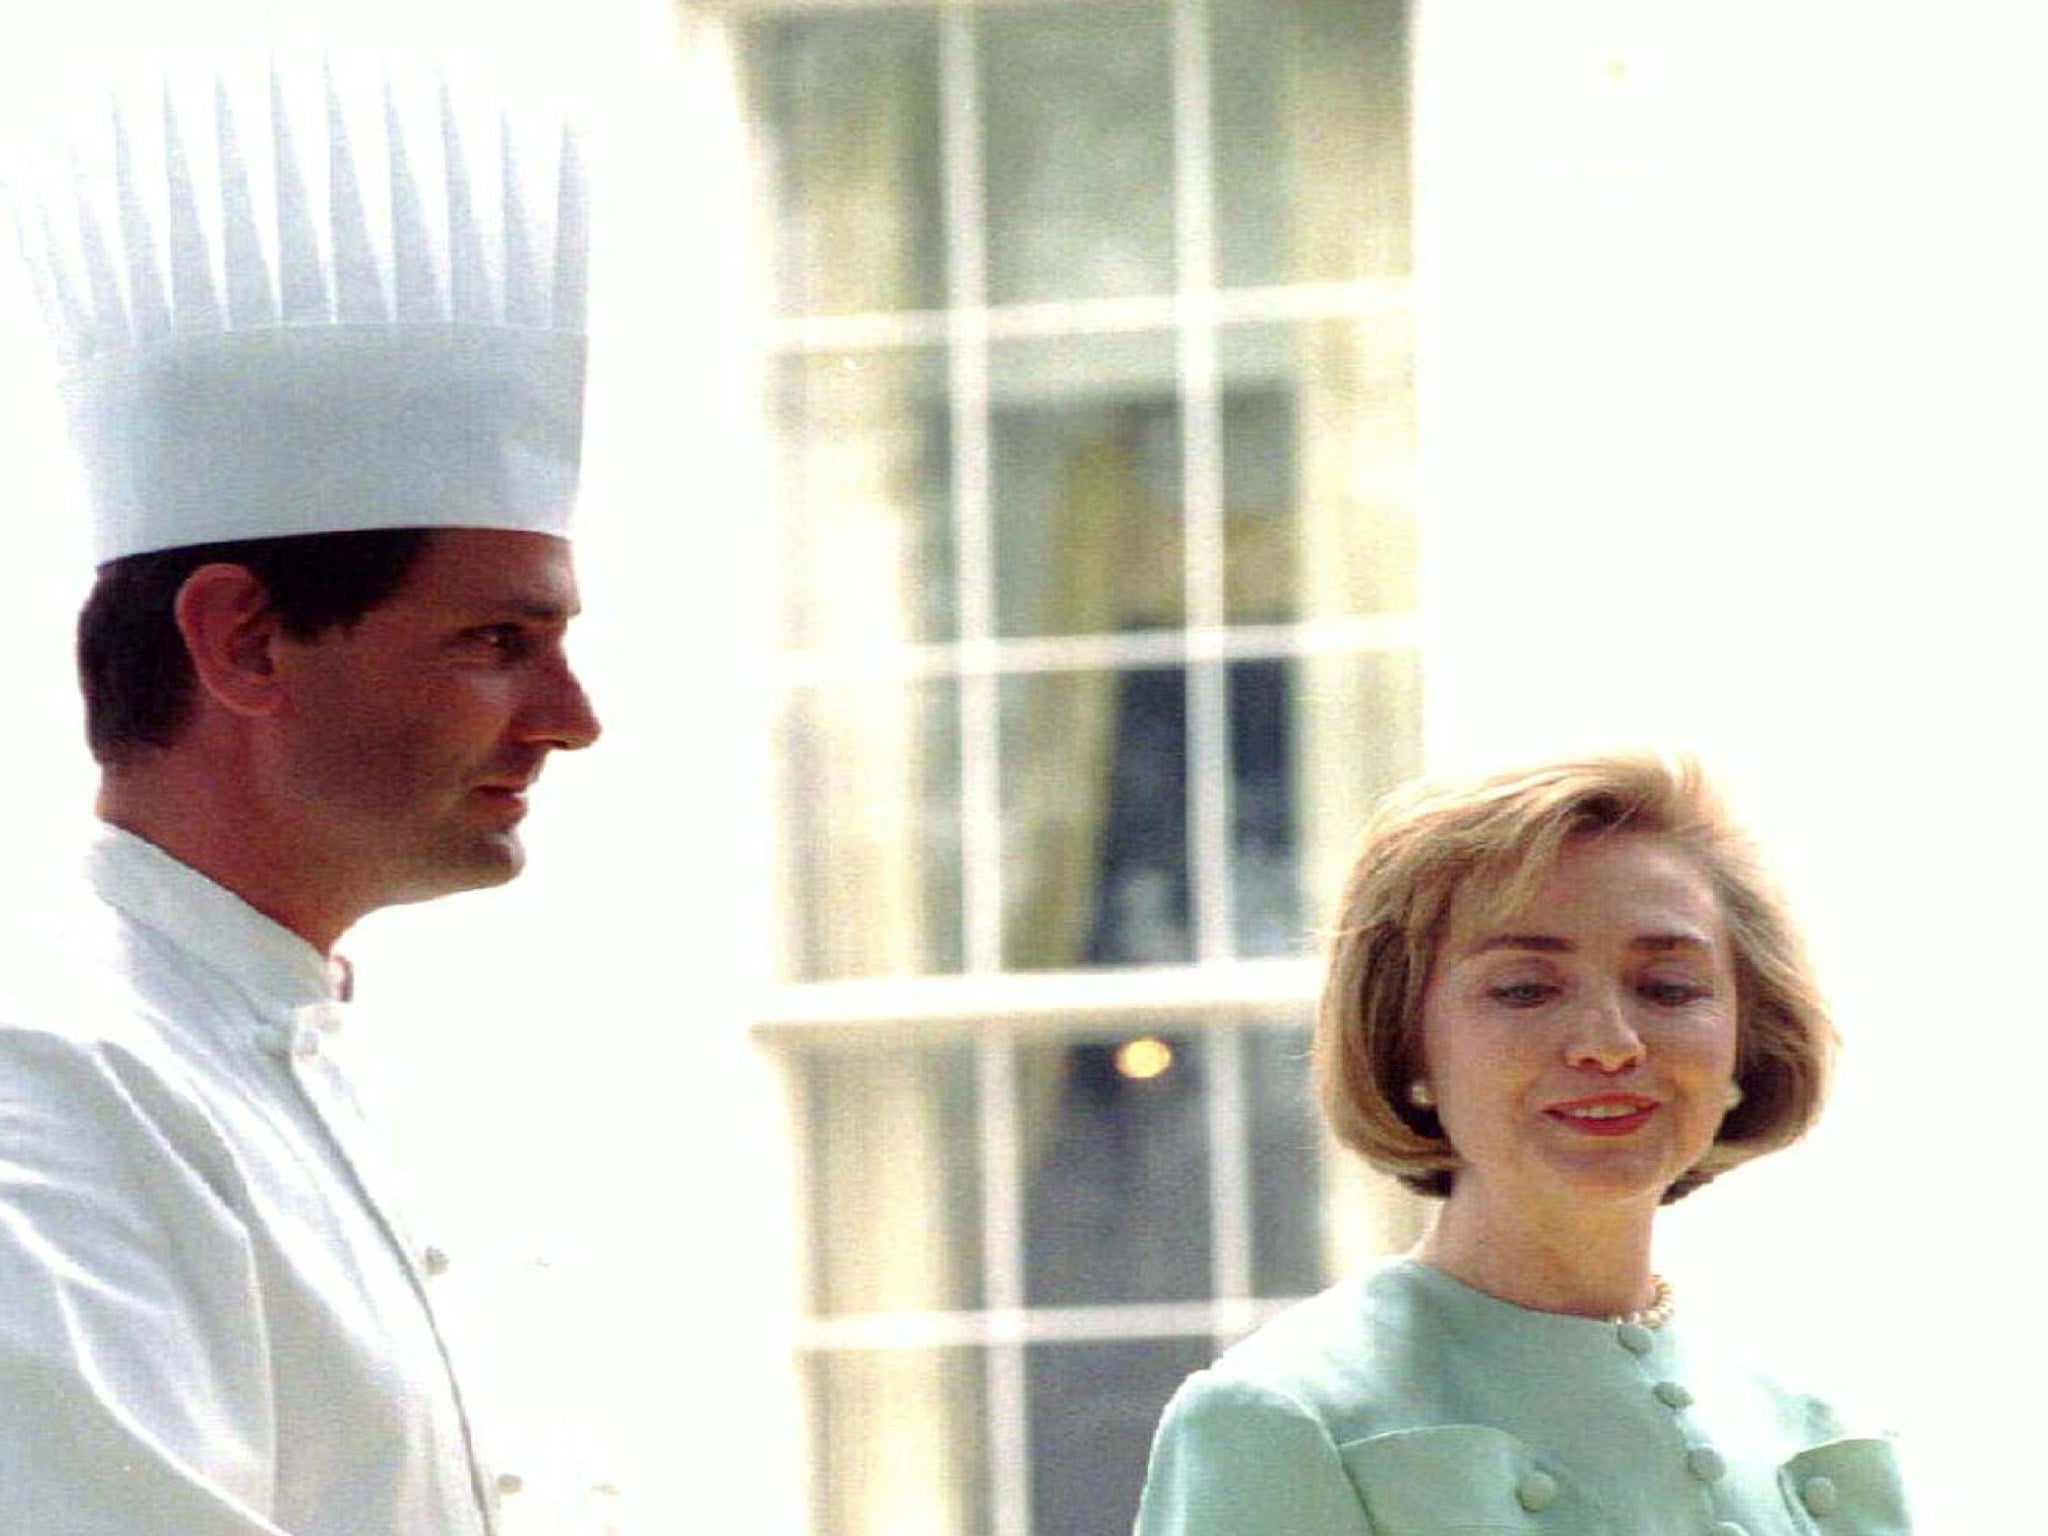 Walter Scheib and Hillary Clinton in 1997